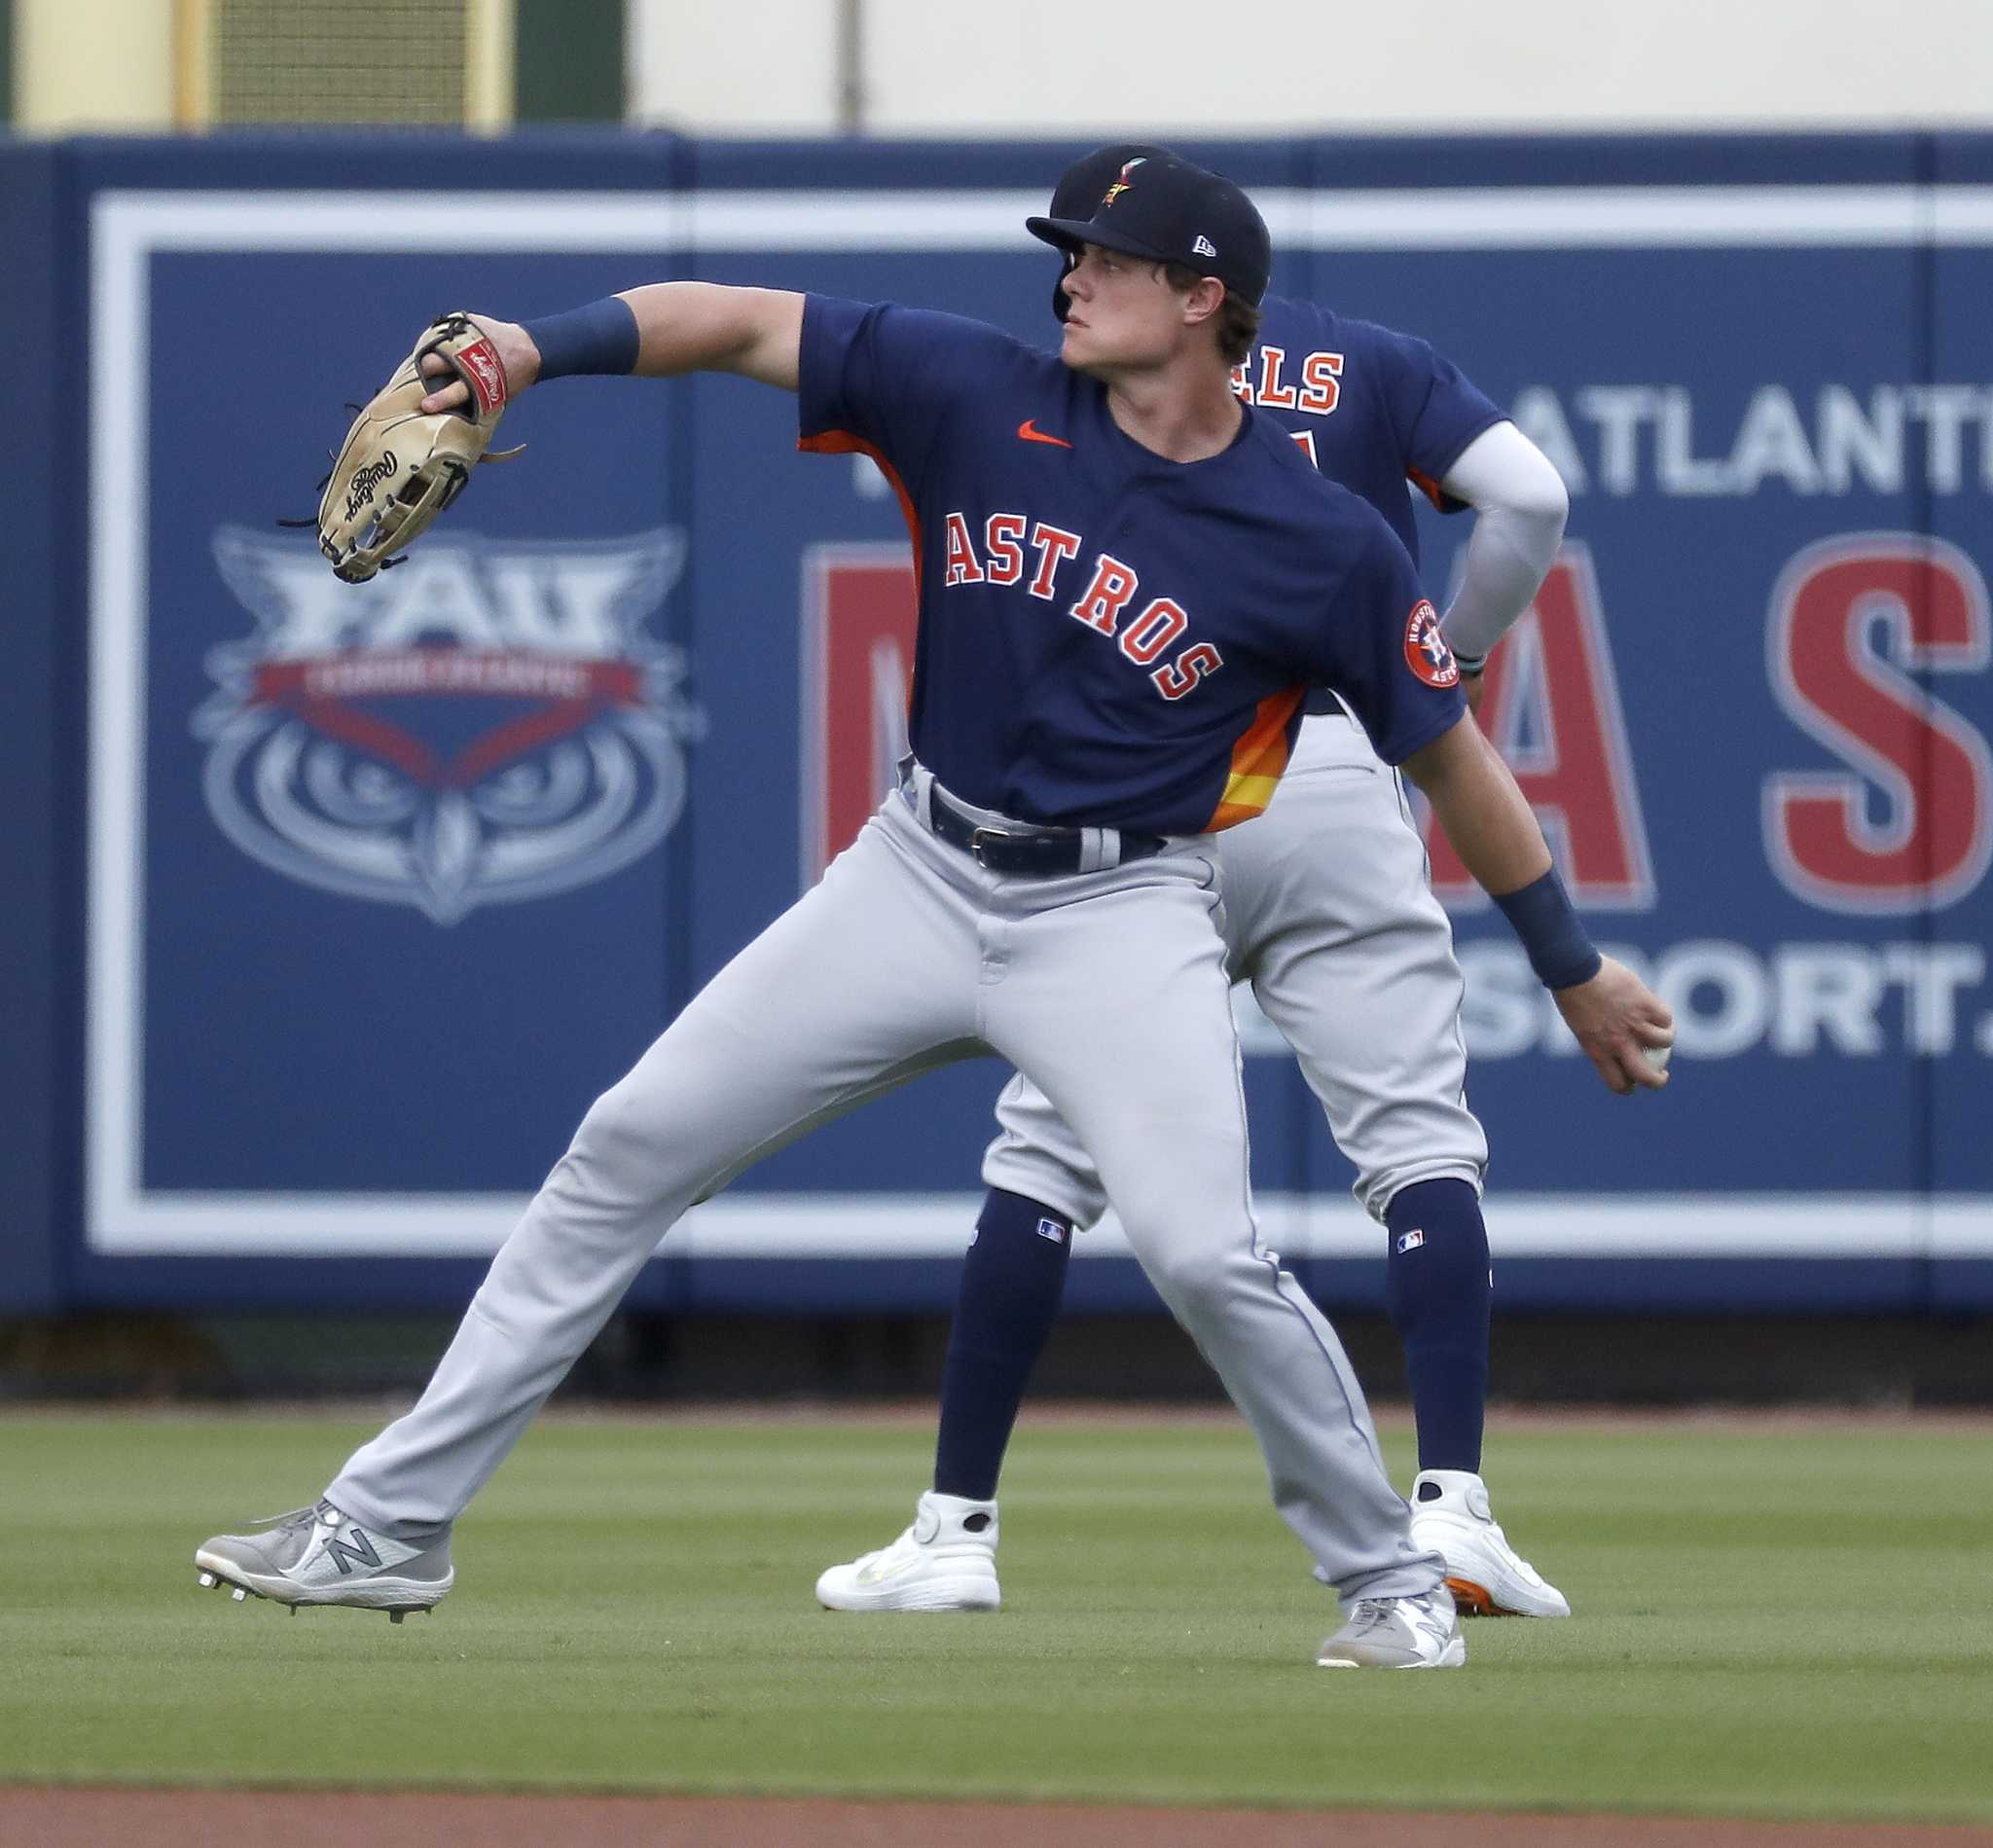 Jake Meyers soaks up promotion to Astros